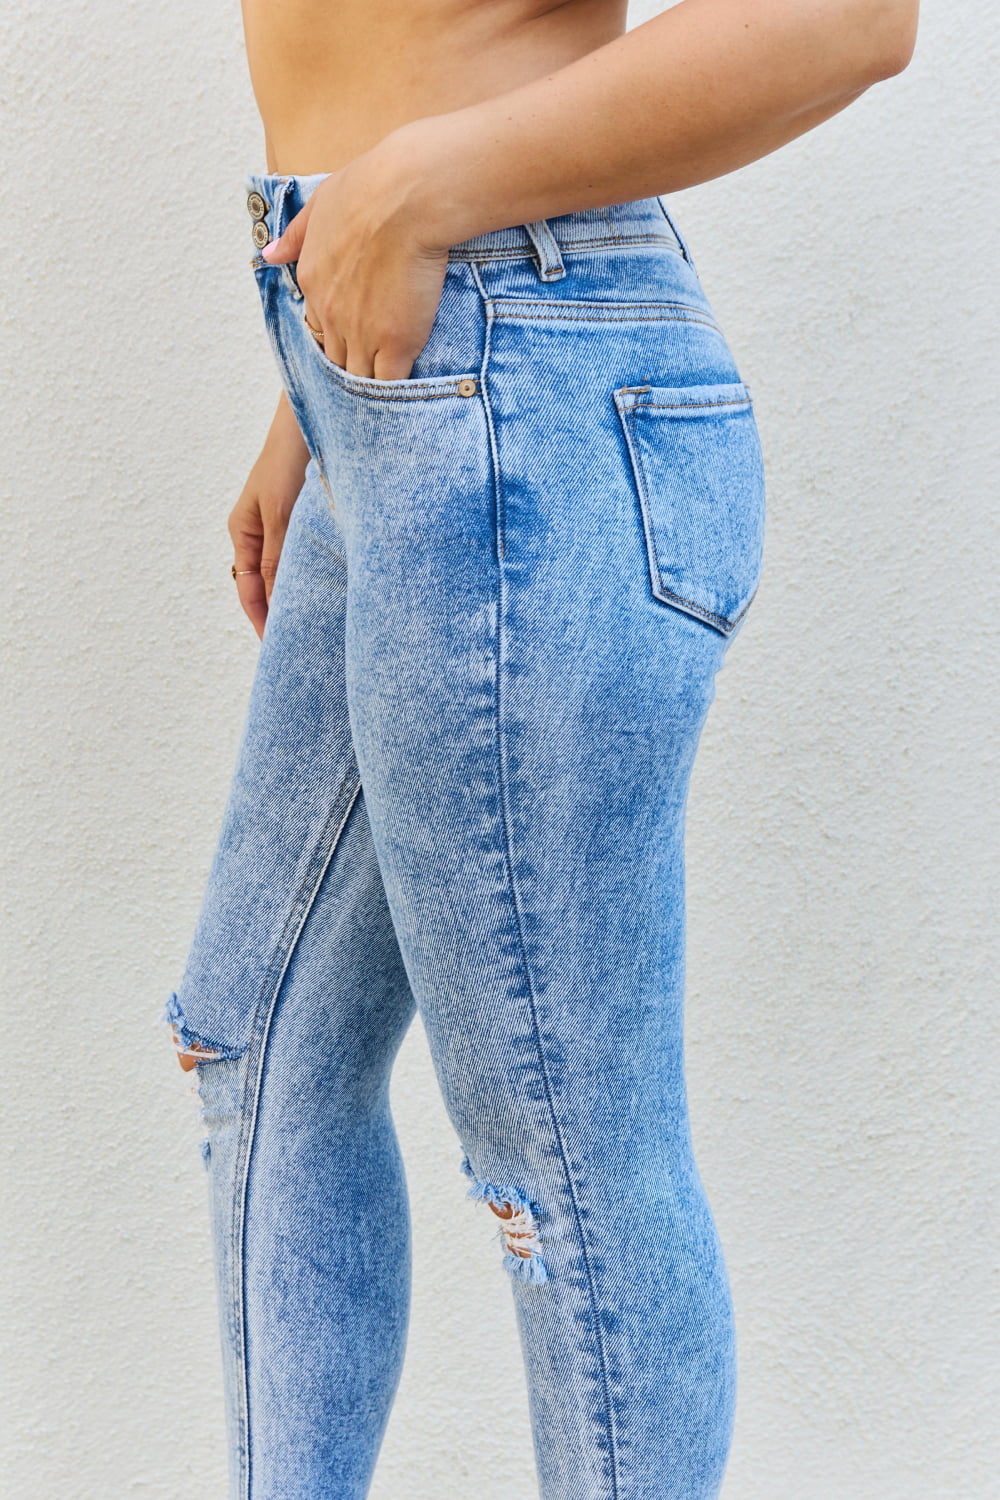 Kancan Emma High Rise Distressed Skinny Jeans - Online Only